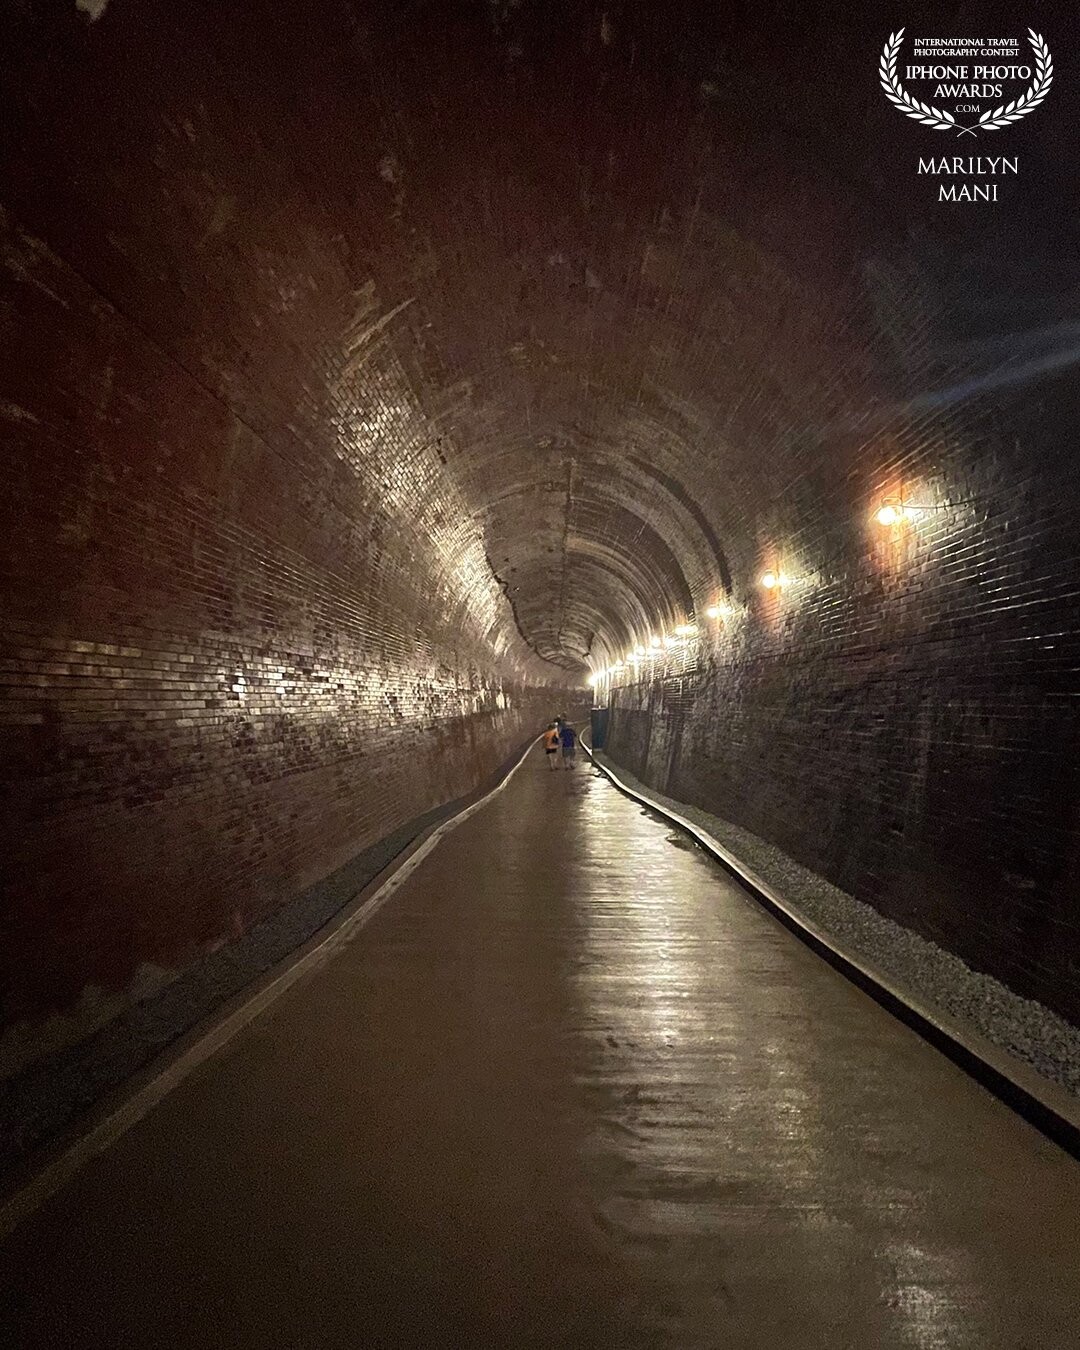 The 2200 feet long tunnel 180 feet beneath the historic Niagara Parks Power Station! A never seen before underground world captured here, left me amazed at this more than a century old excavation.